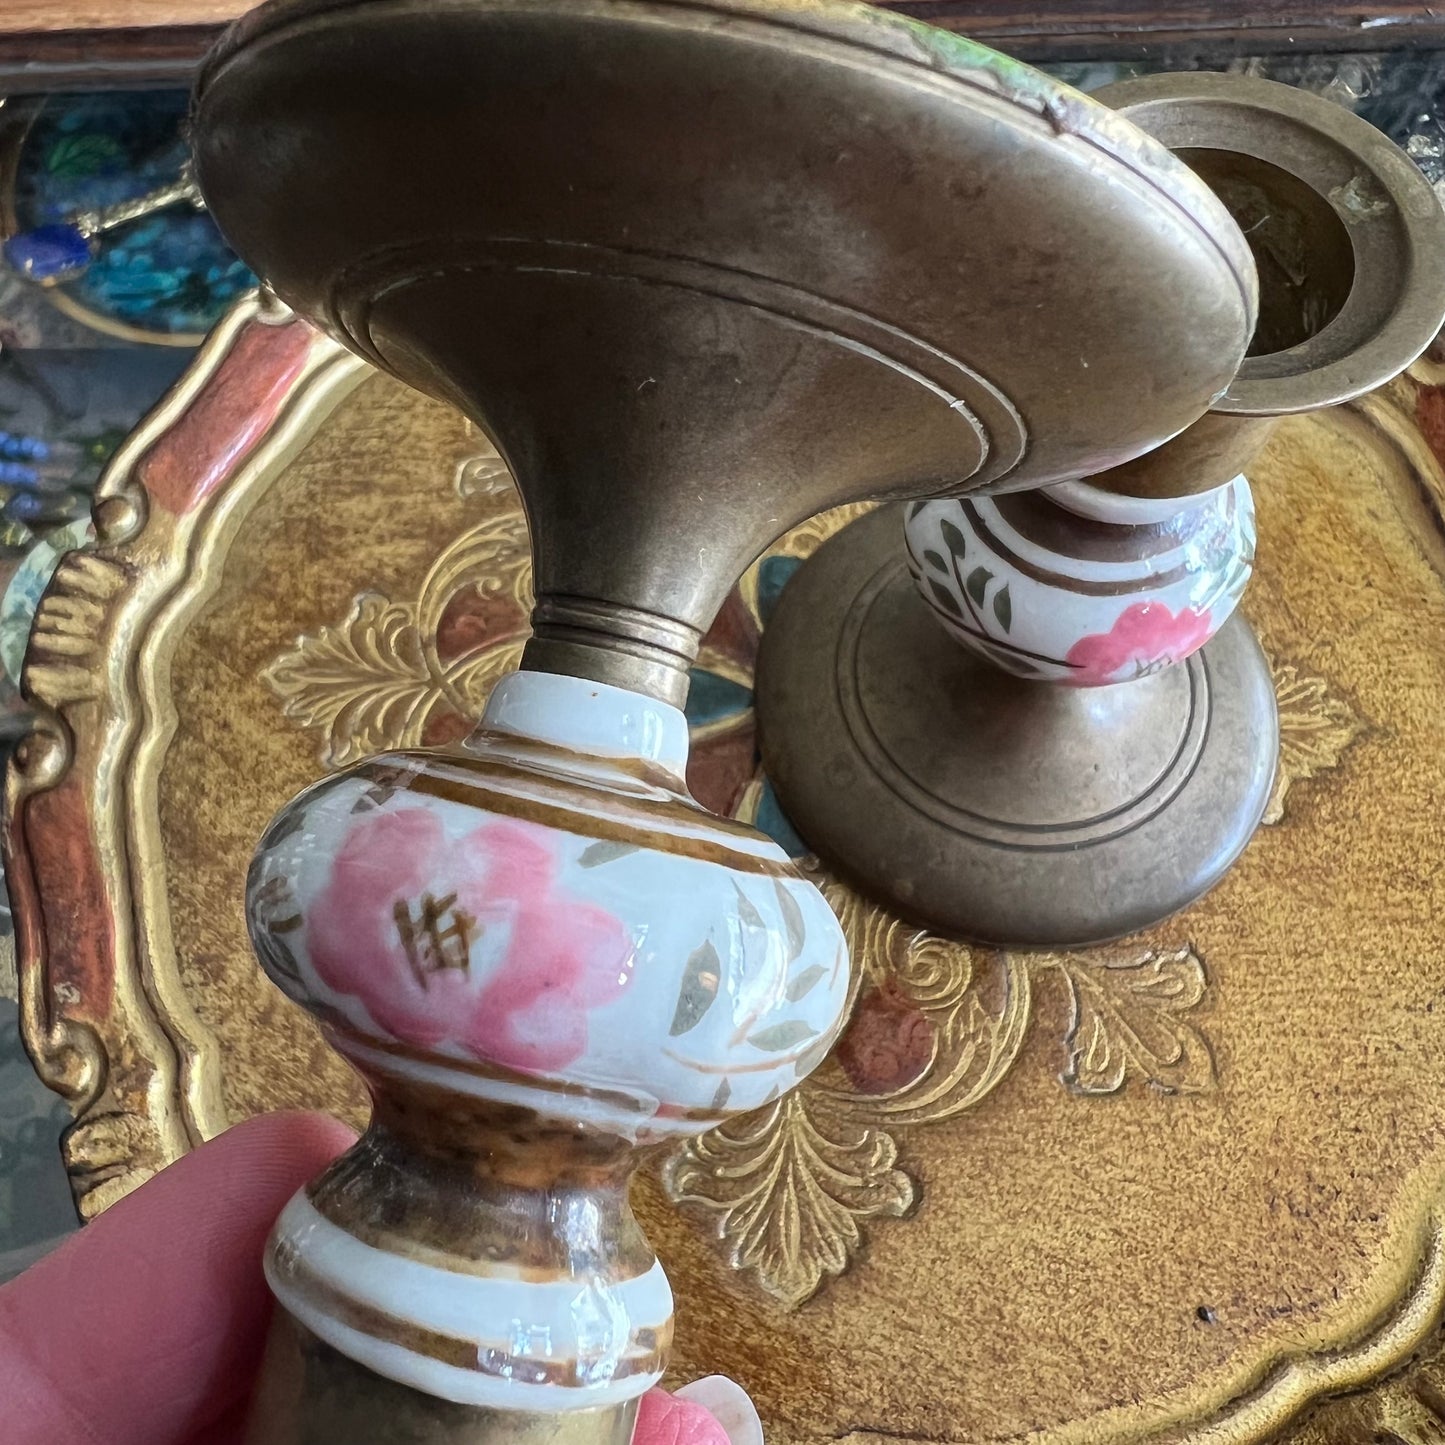 Vintage Brass & Hand Painted Porcelain Candlestick Pair